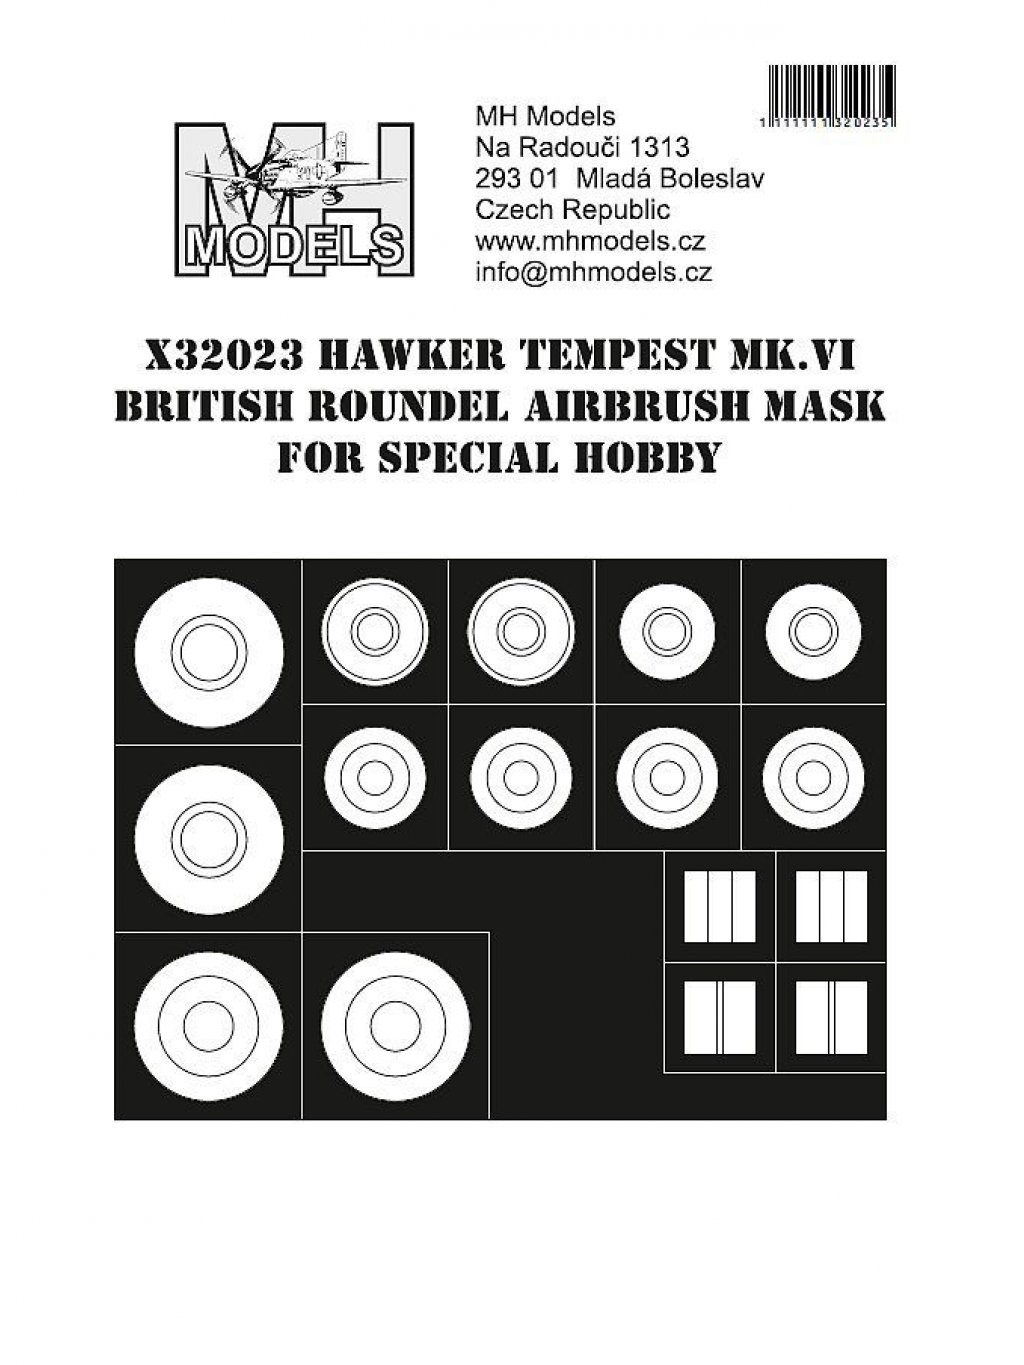 Hawker Tempest Mk.VI British roundel airbrush mask for Special Hobby